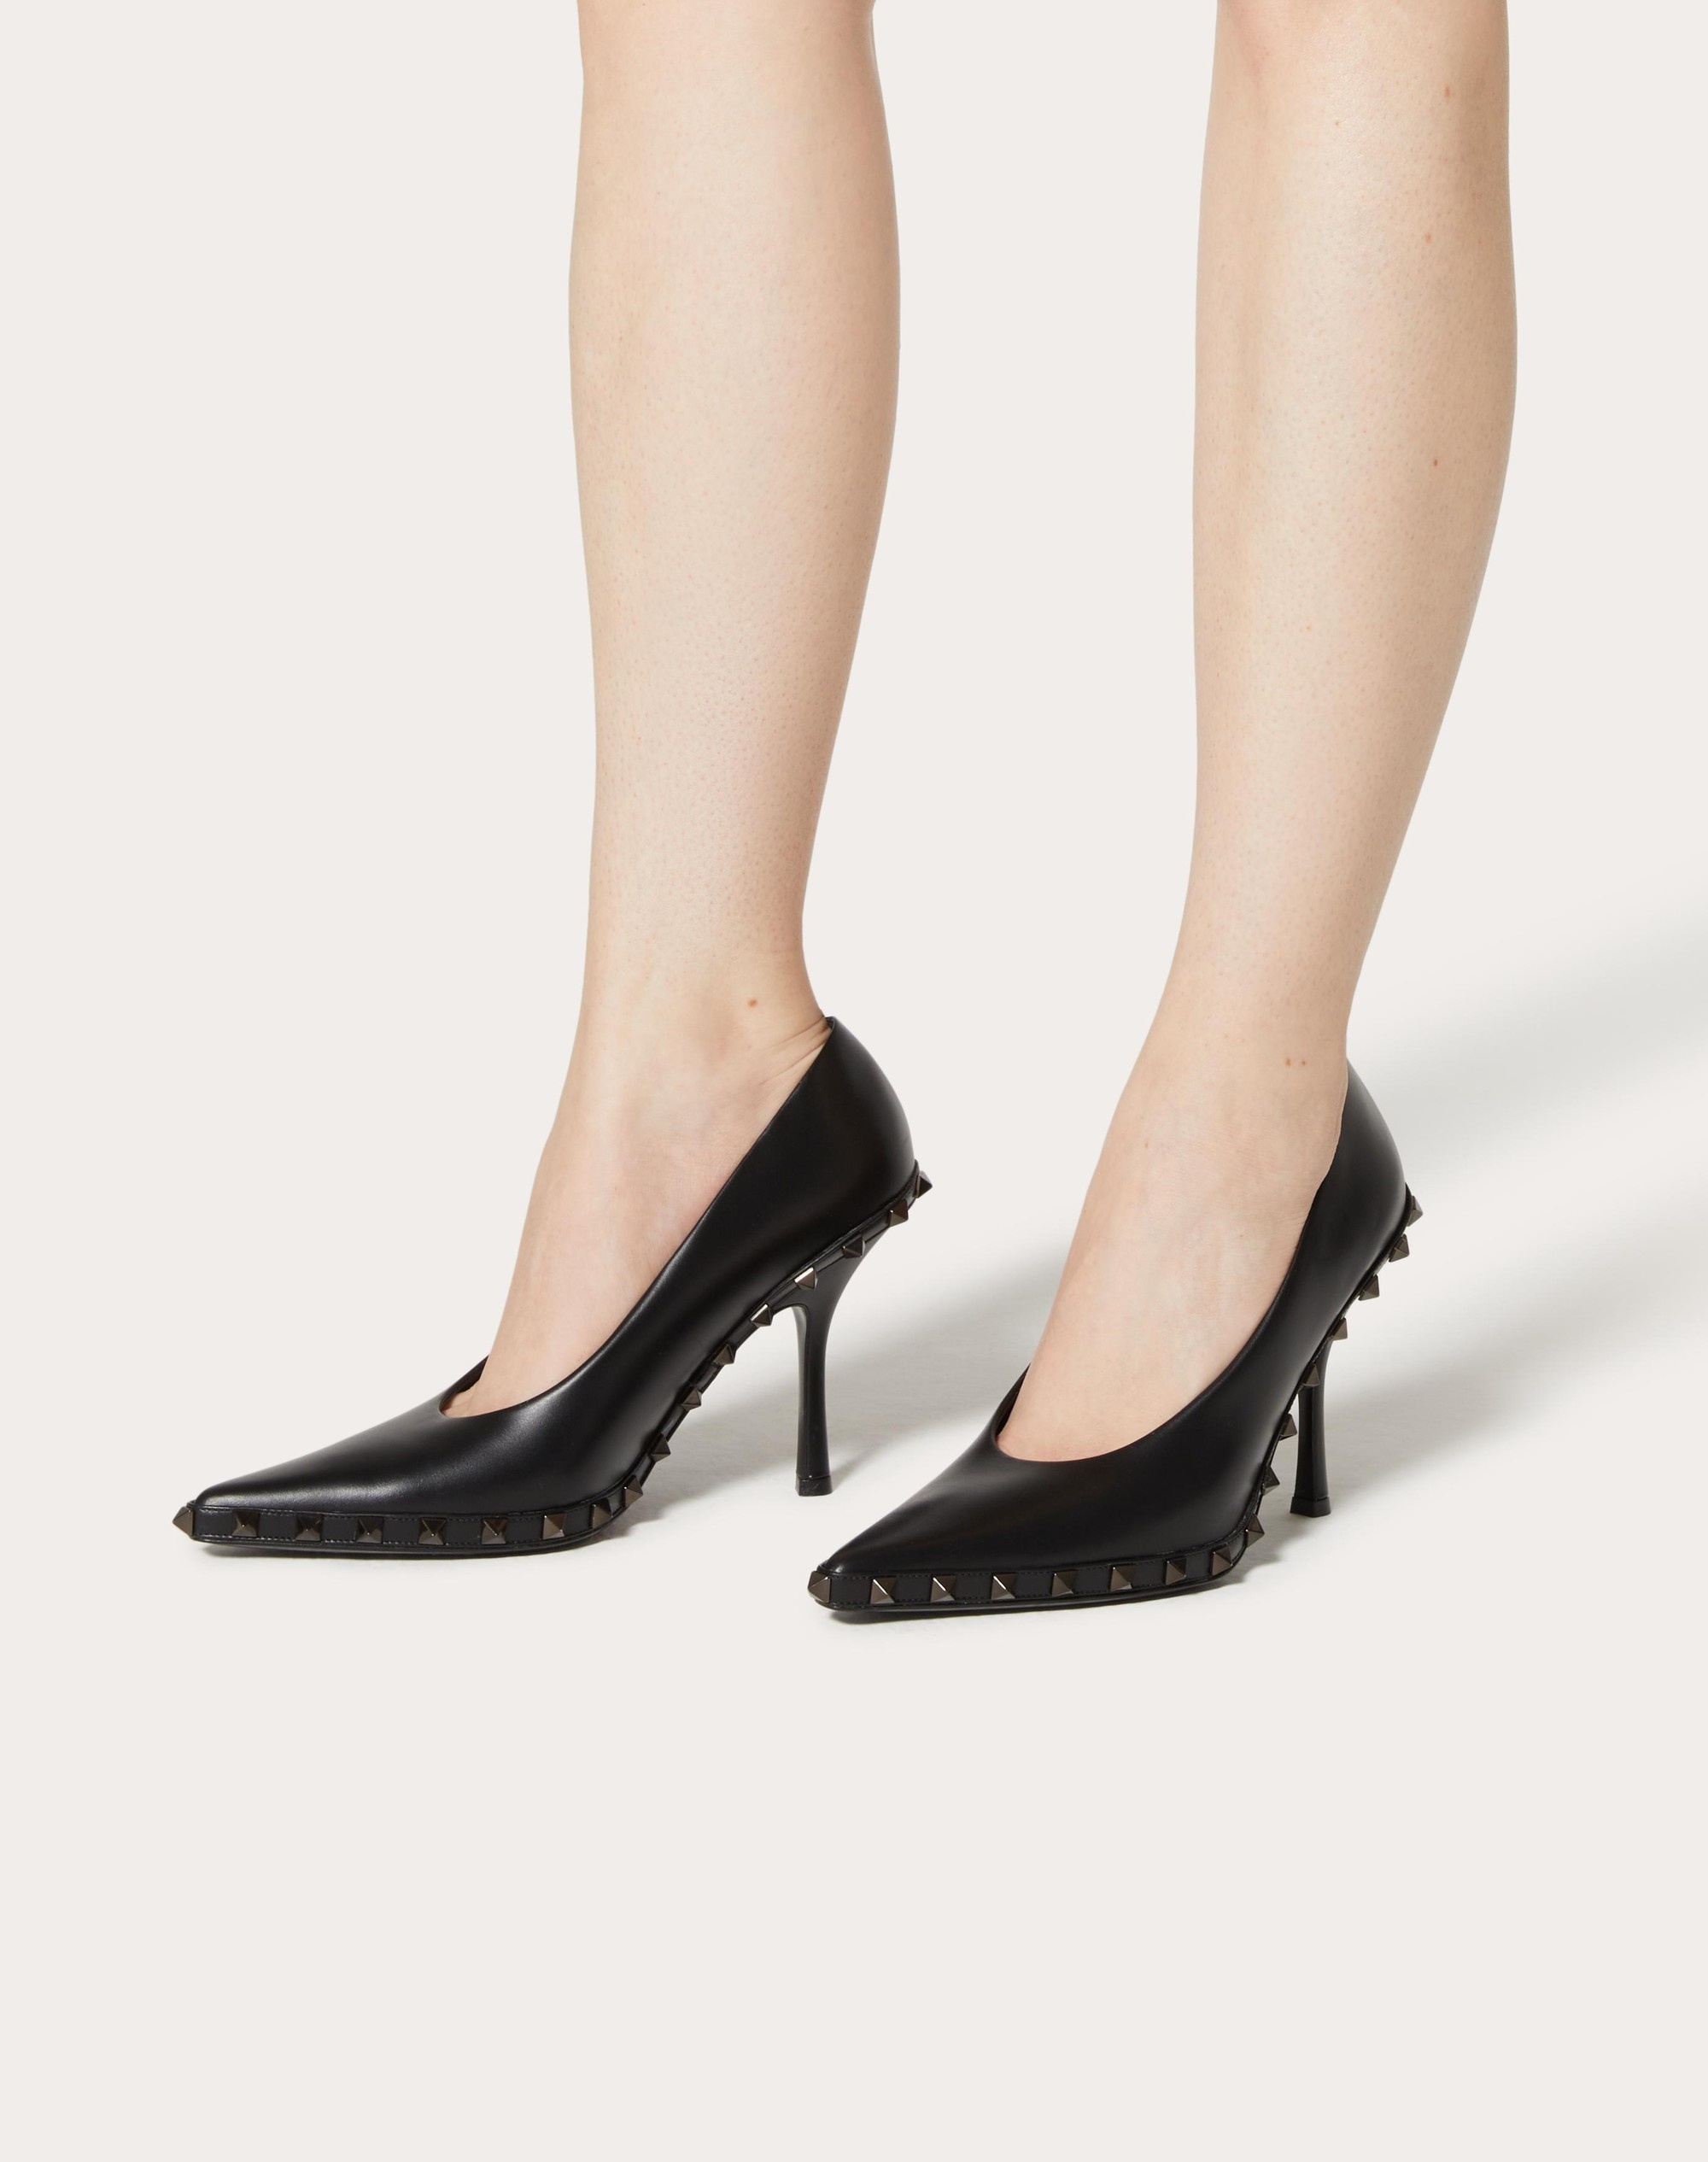 ROCKSTUD PUMPS IN CALFSKIN WITH TONE-ON-TONE STUDS 100MM - 6